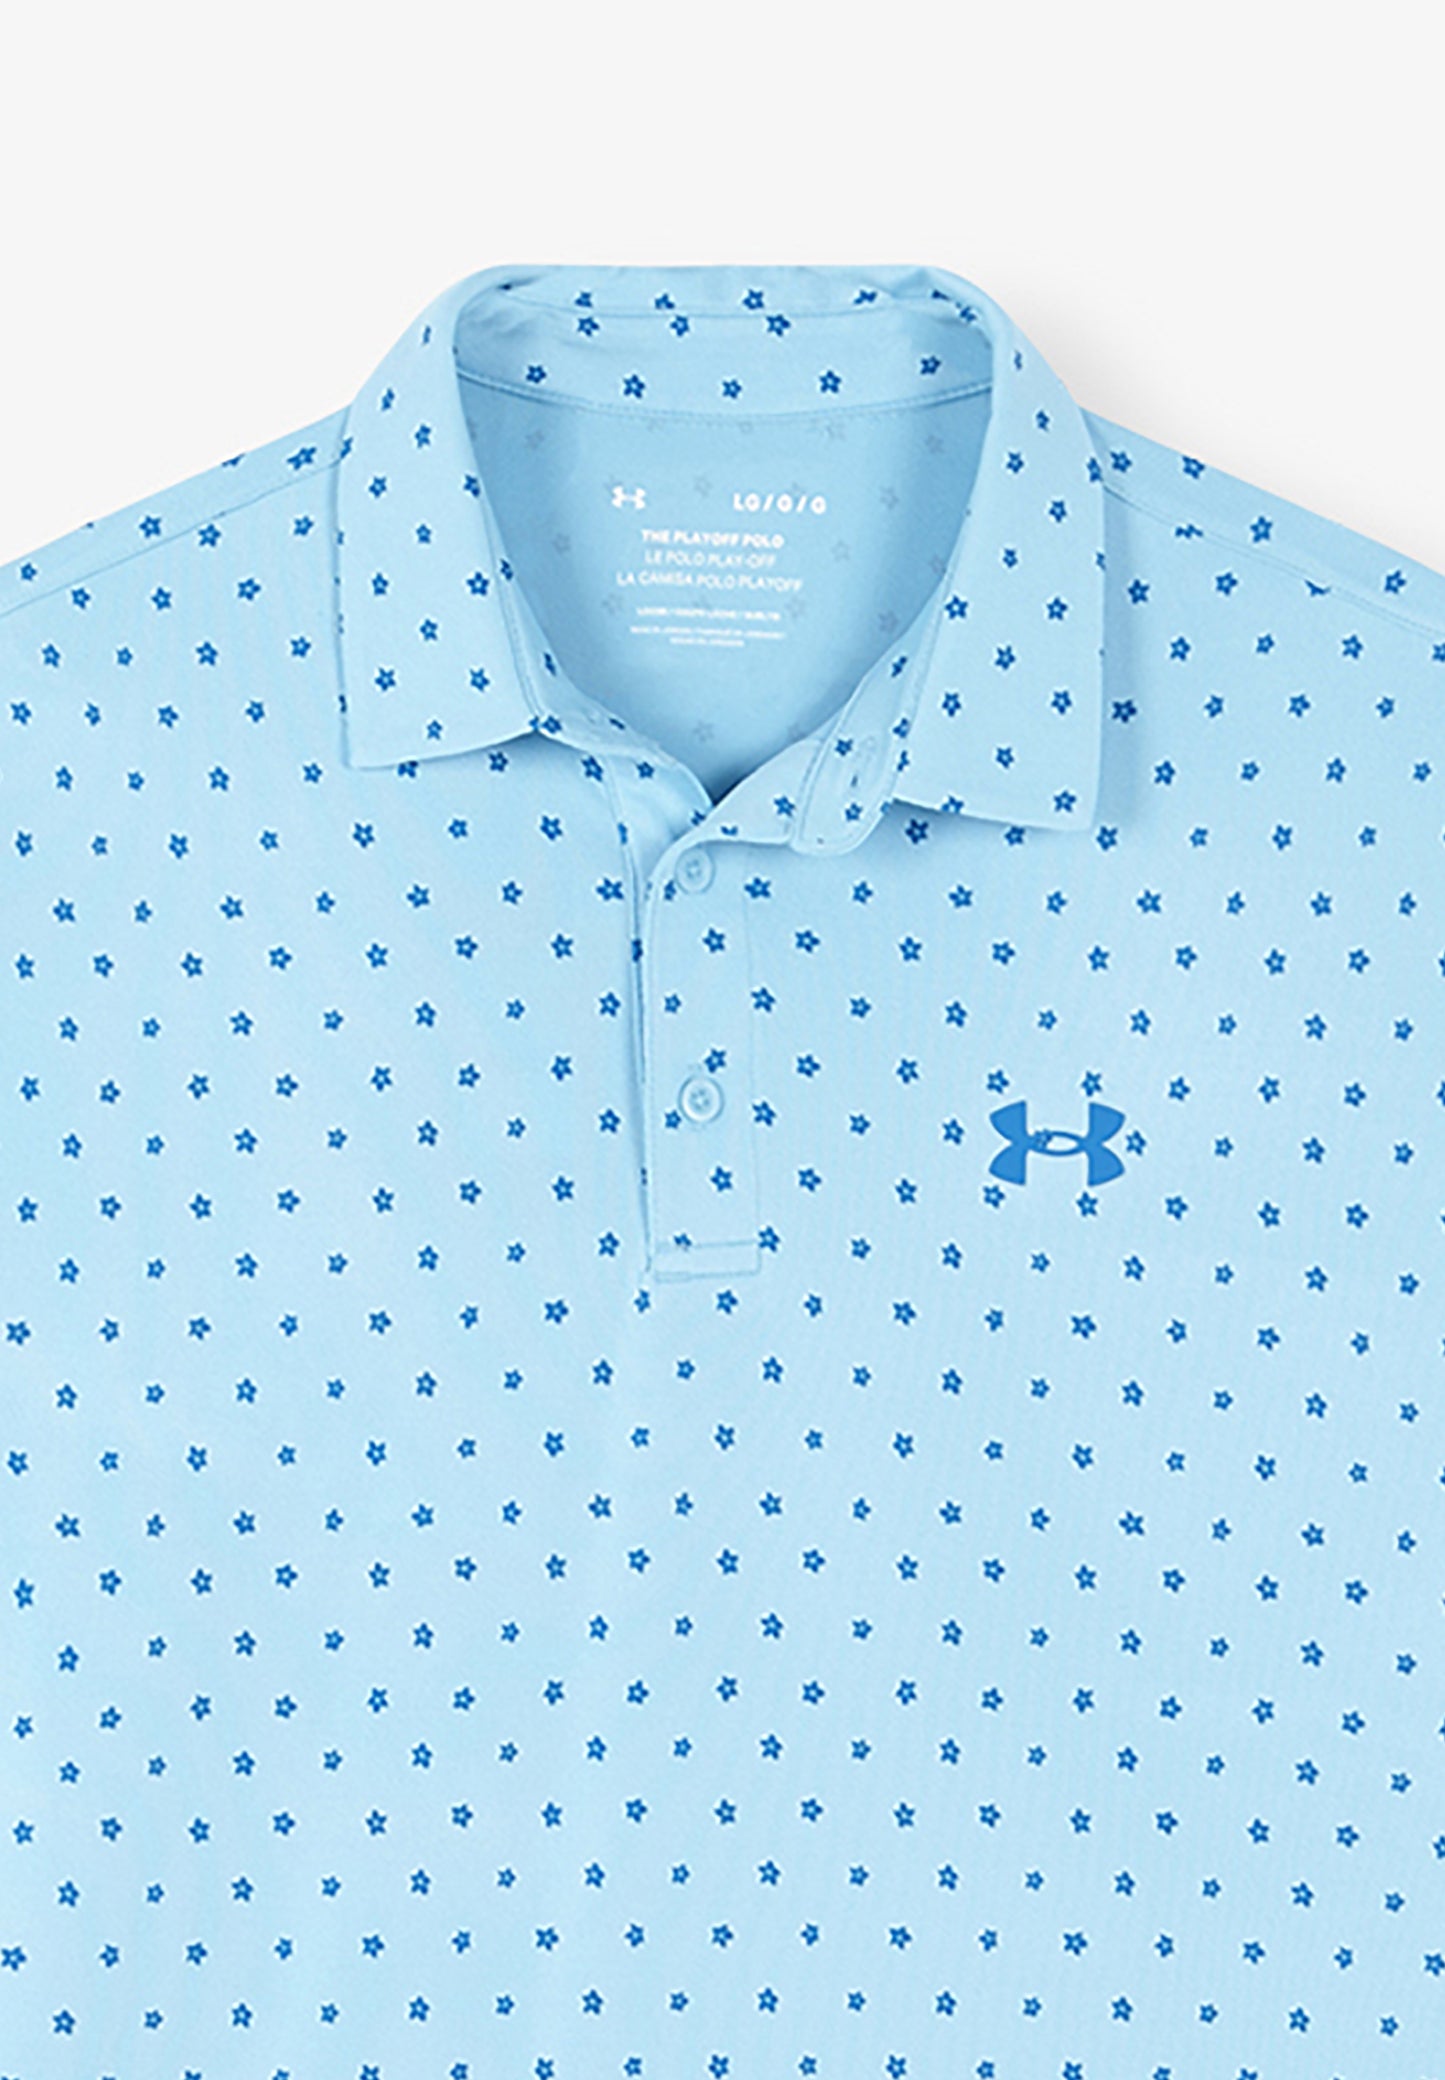 UNDER ARMOUR | POLO PLAYOFF 2.0